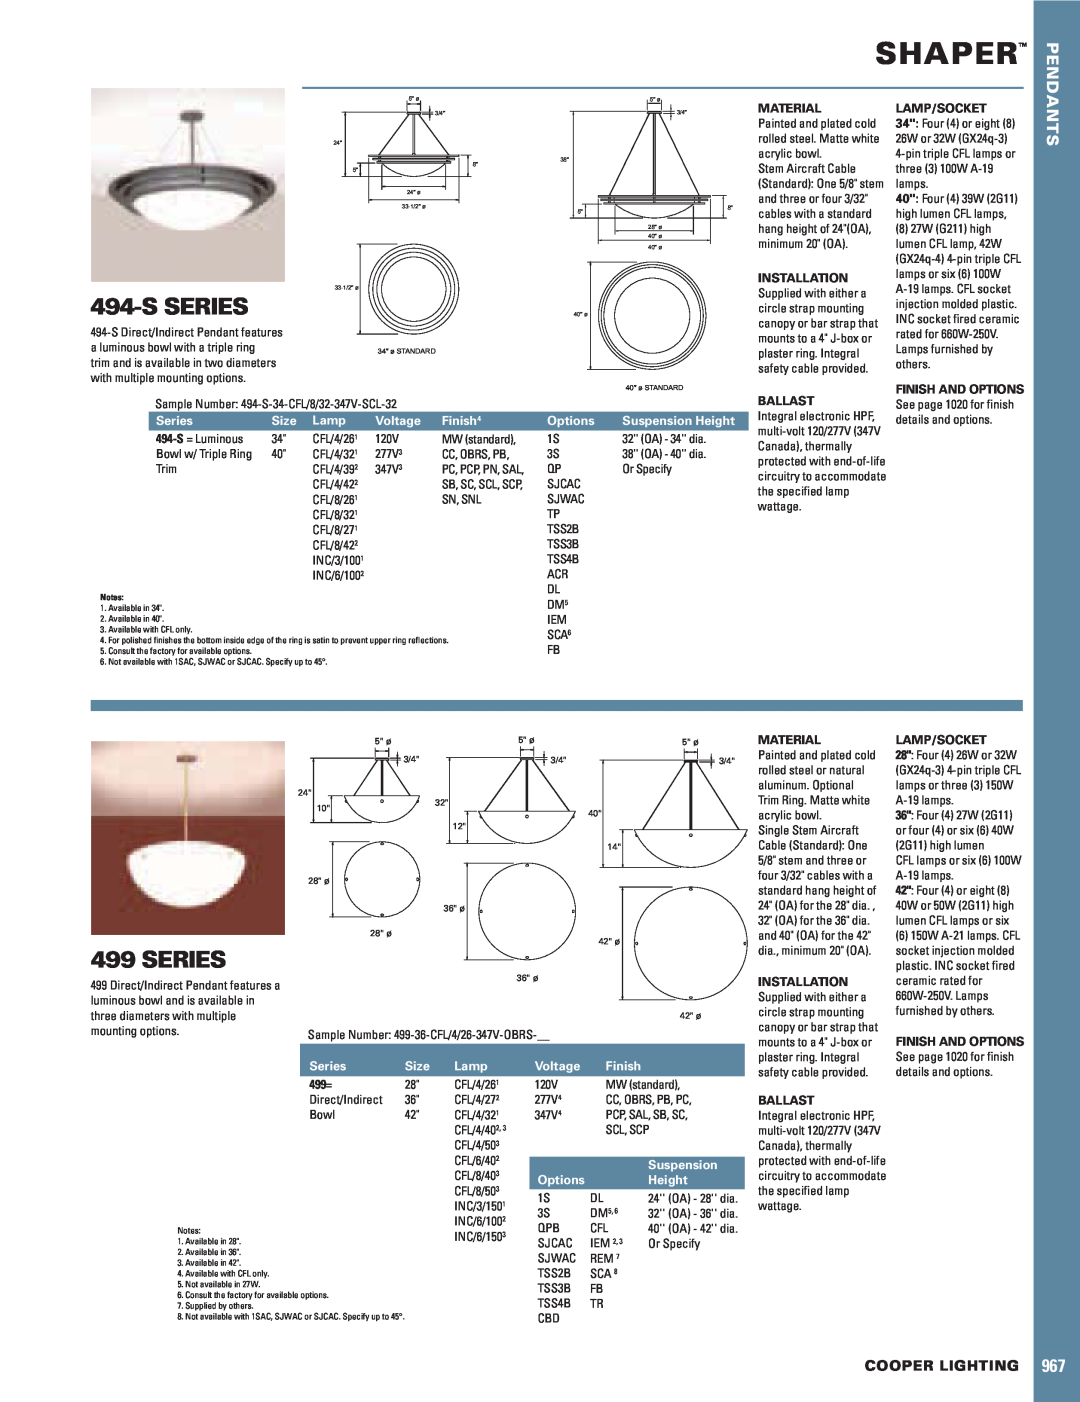 Cooper Lighting 494-S manual Shaper, Sseries, Series, Cooper Lighting, Material, Installation, Finish And Options, Ballast 